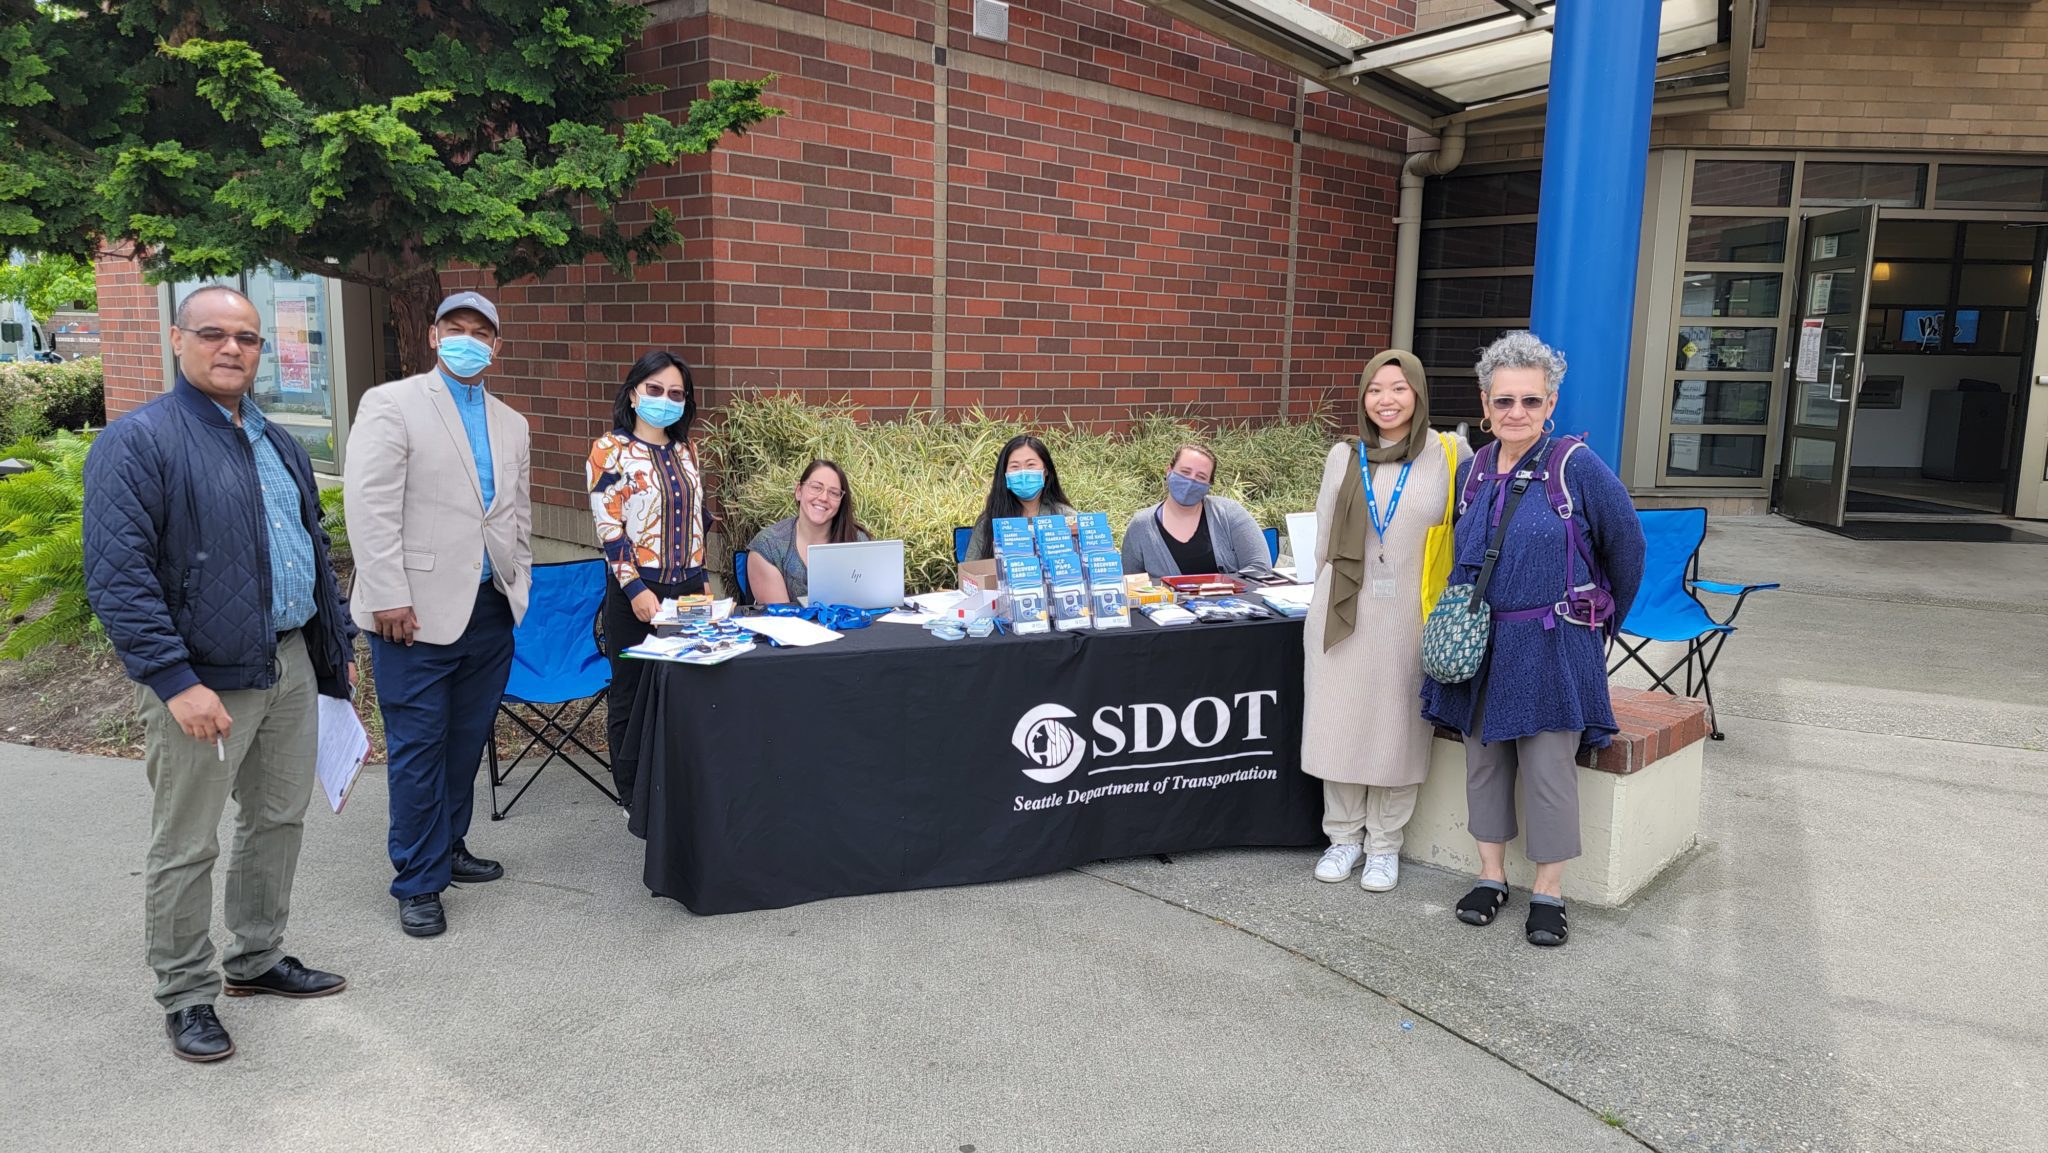 We partnered with Community Liaisons to get out the word about Recovery cards! Photo of community members and City of Seattle staff smiling at a recent outreach event, with an SDOT table located in the middle.